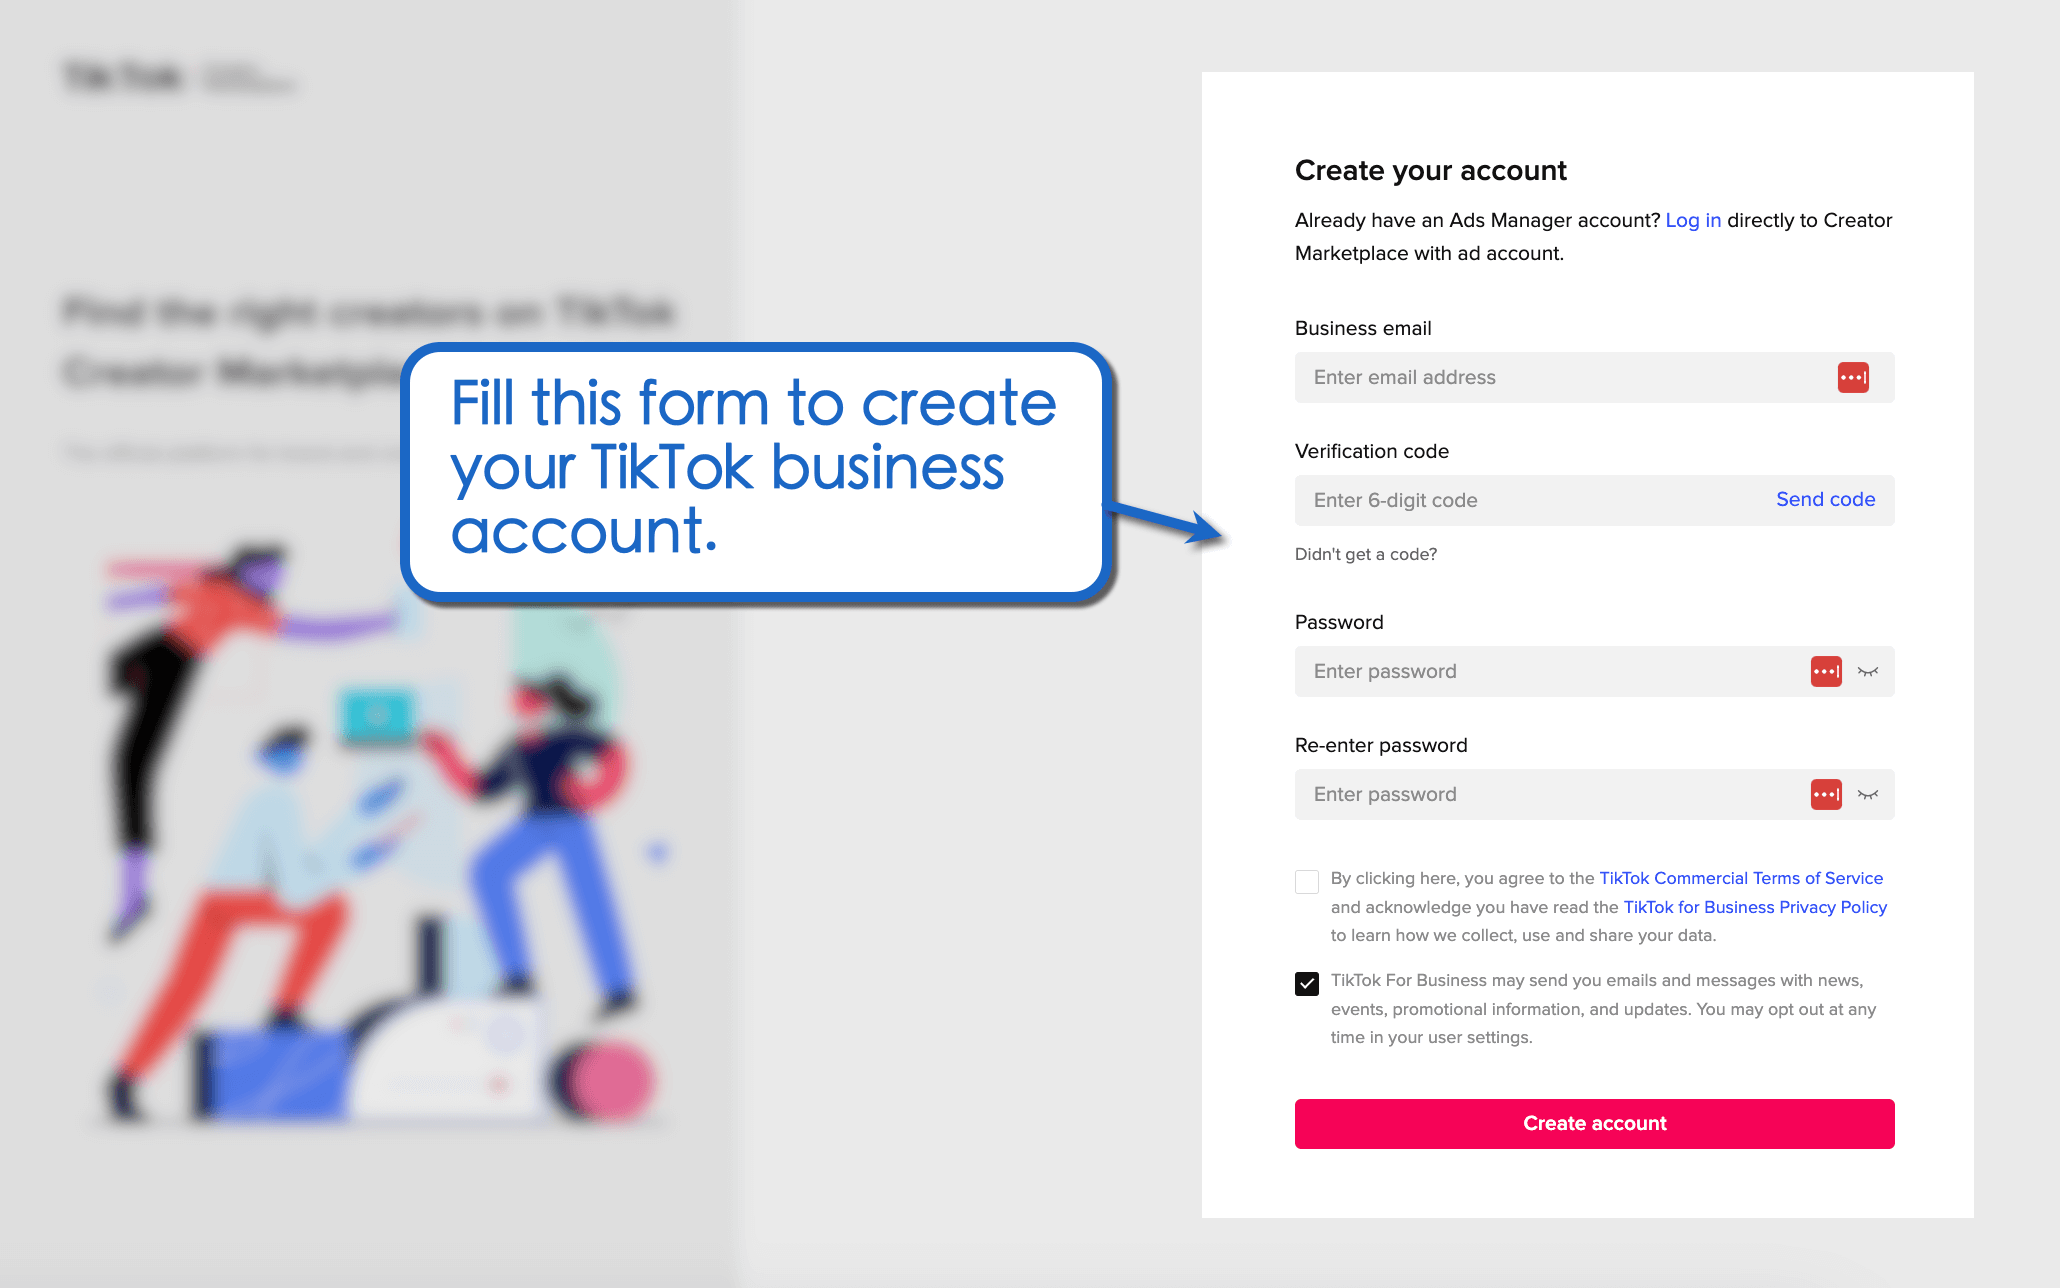 Fill the form to create your TikTok Business acccount.